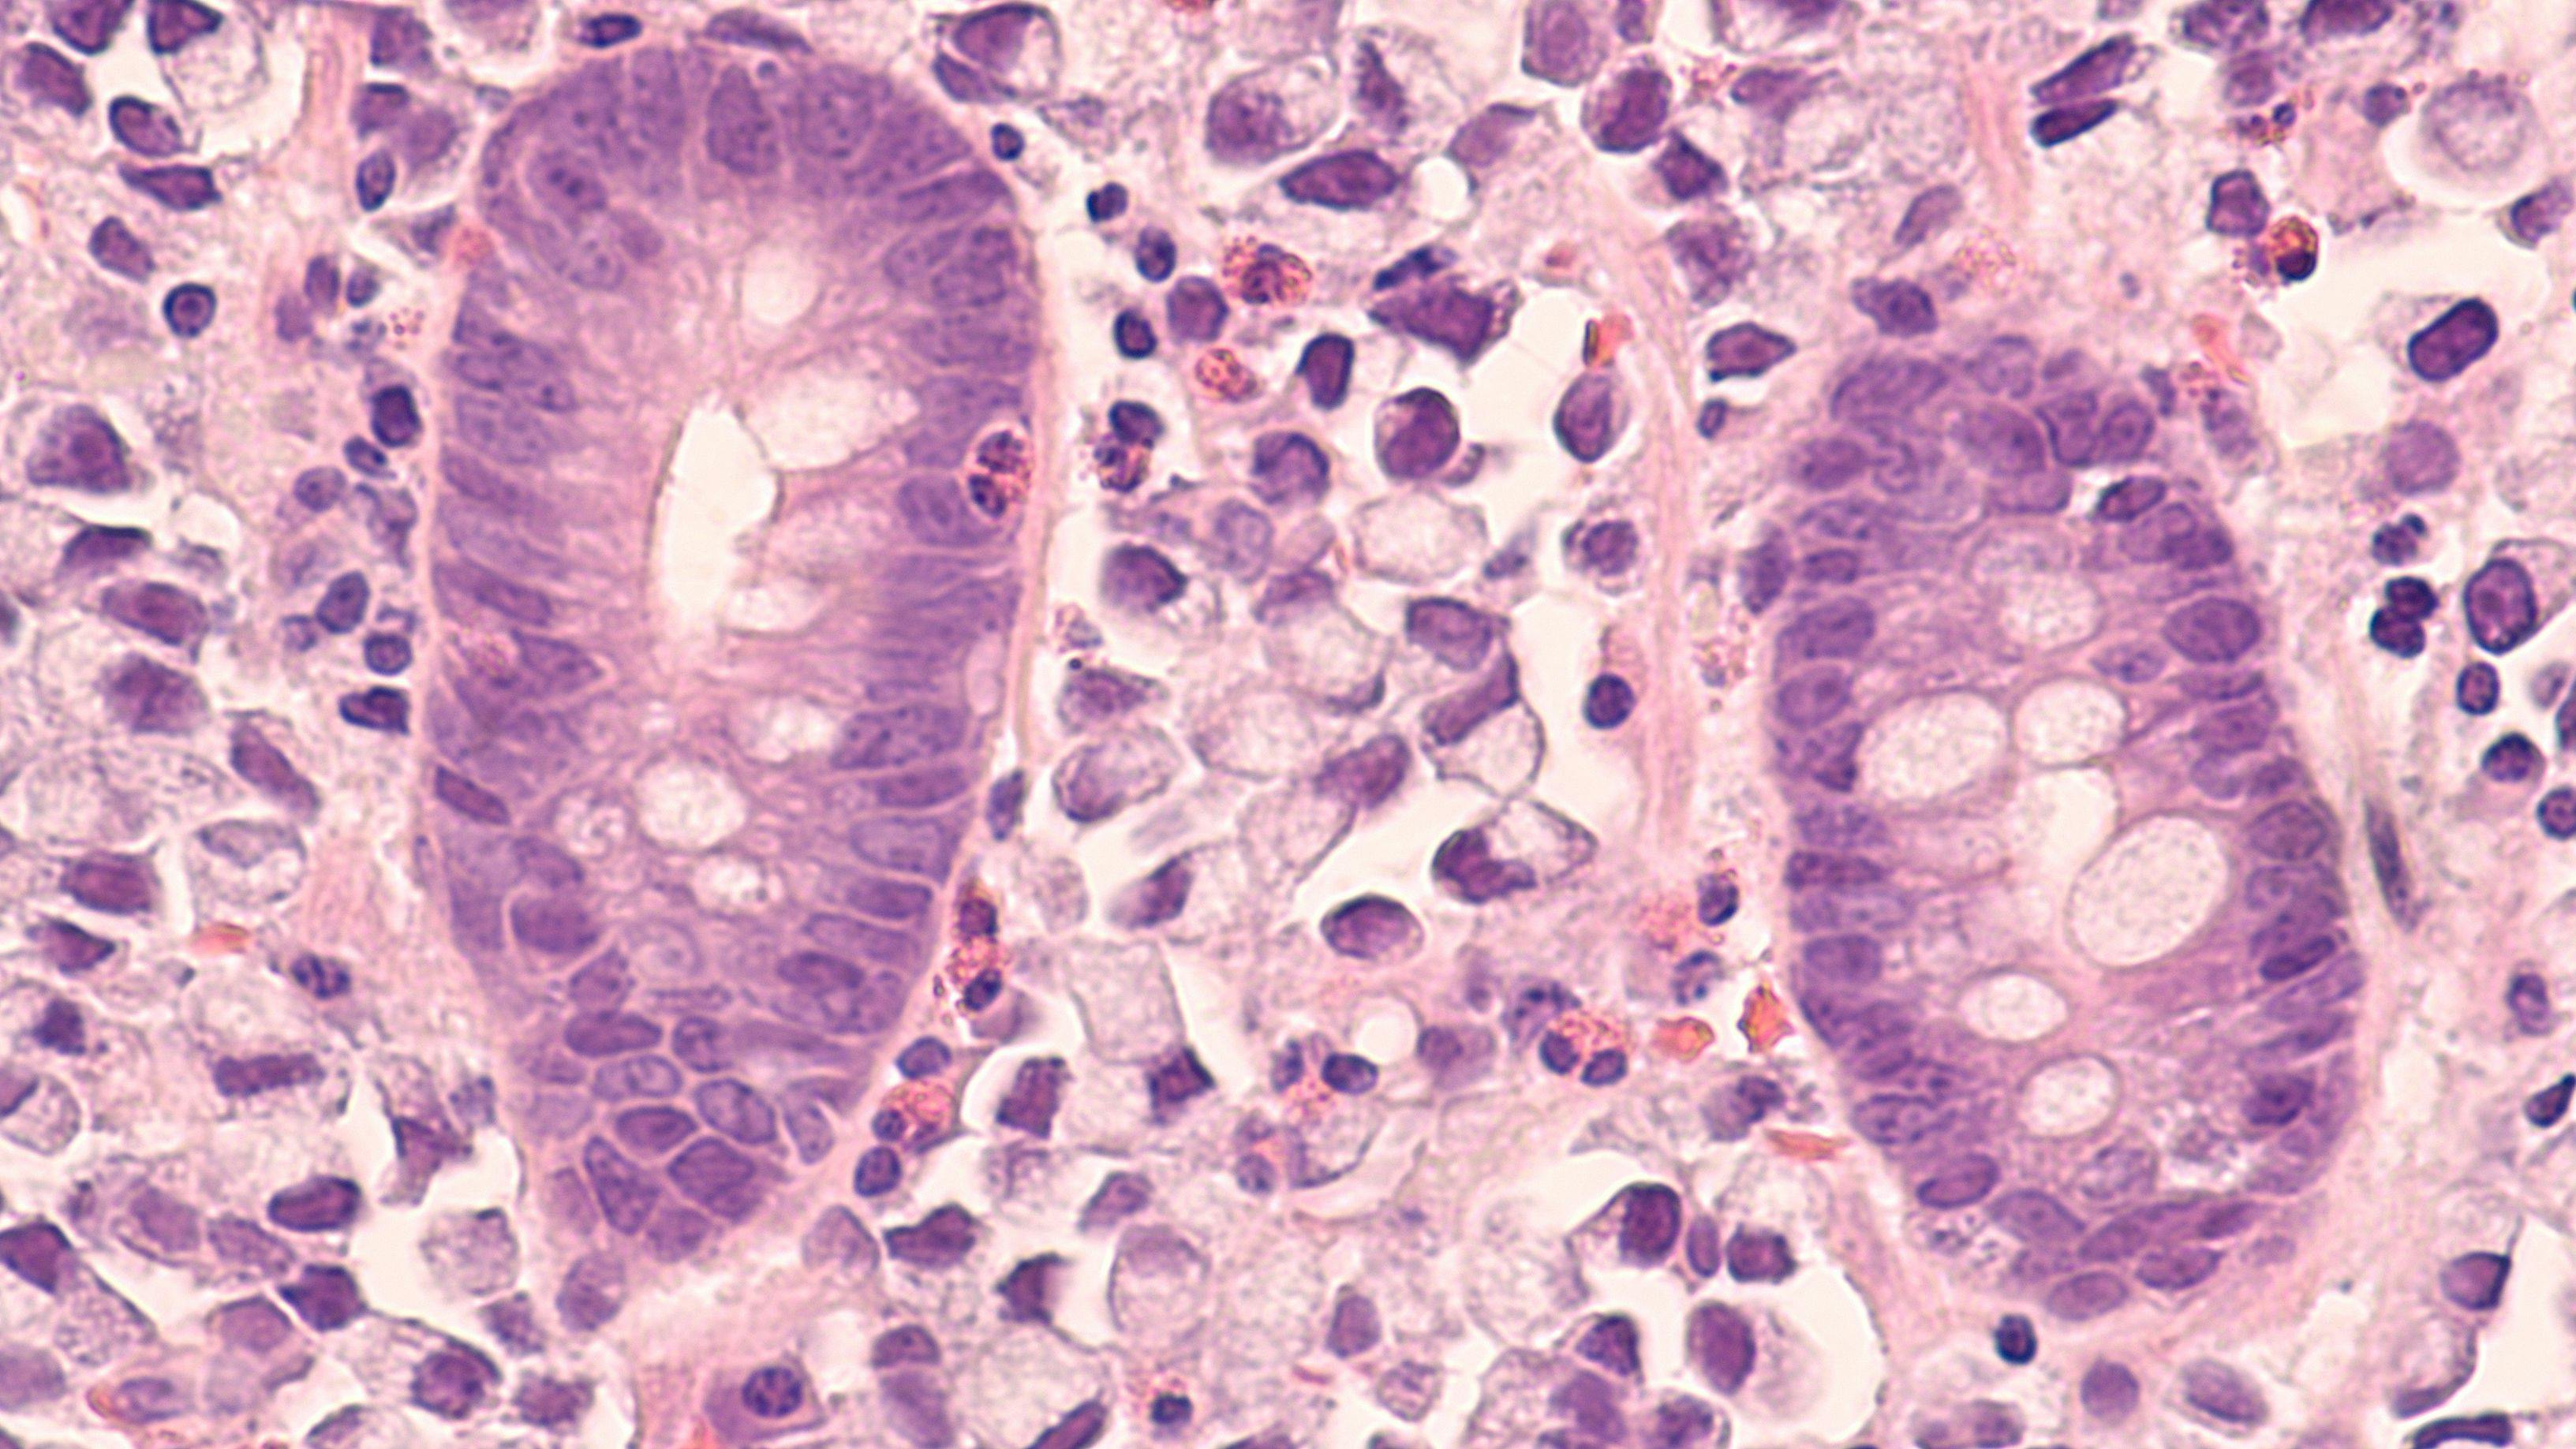 Microscopic image of a stomach cancer (poorly differentiated gastric adenocarcinoma, mucinous signet ring type), metastatic to colon - Image credit: David A Litman | stock.adobe.com